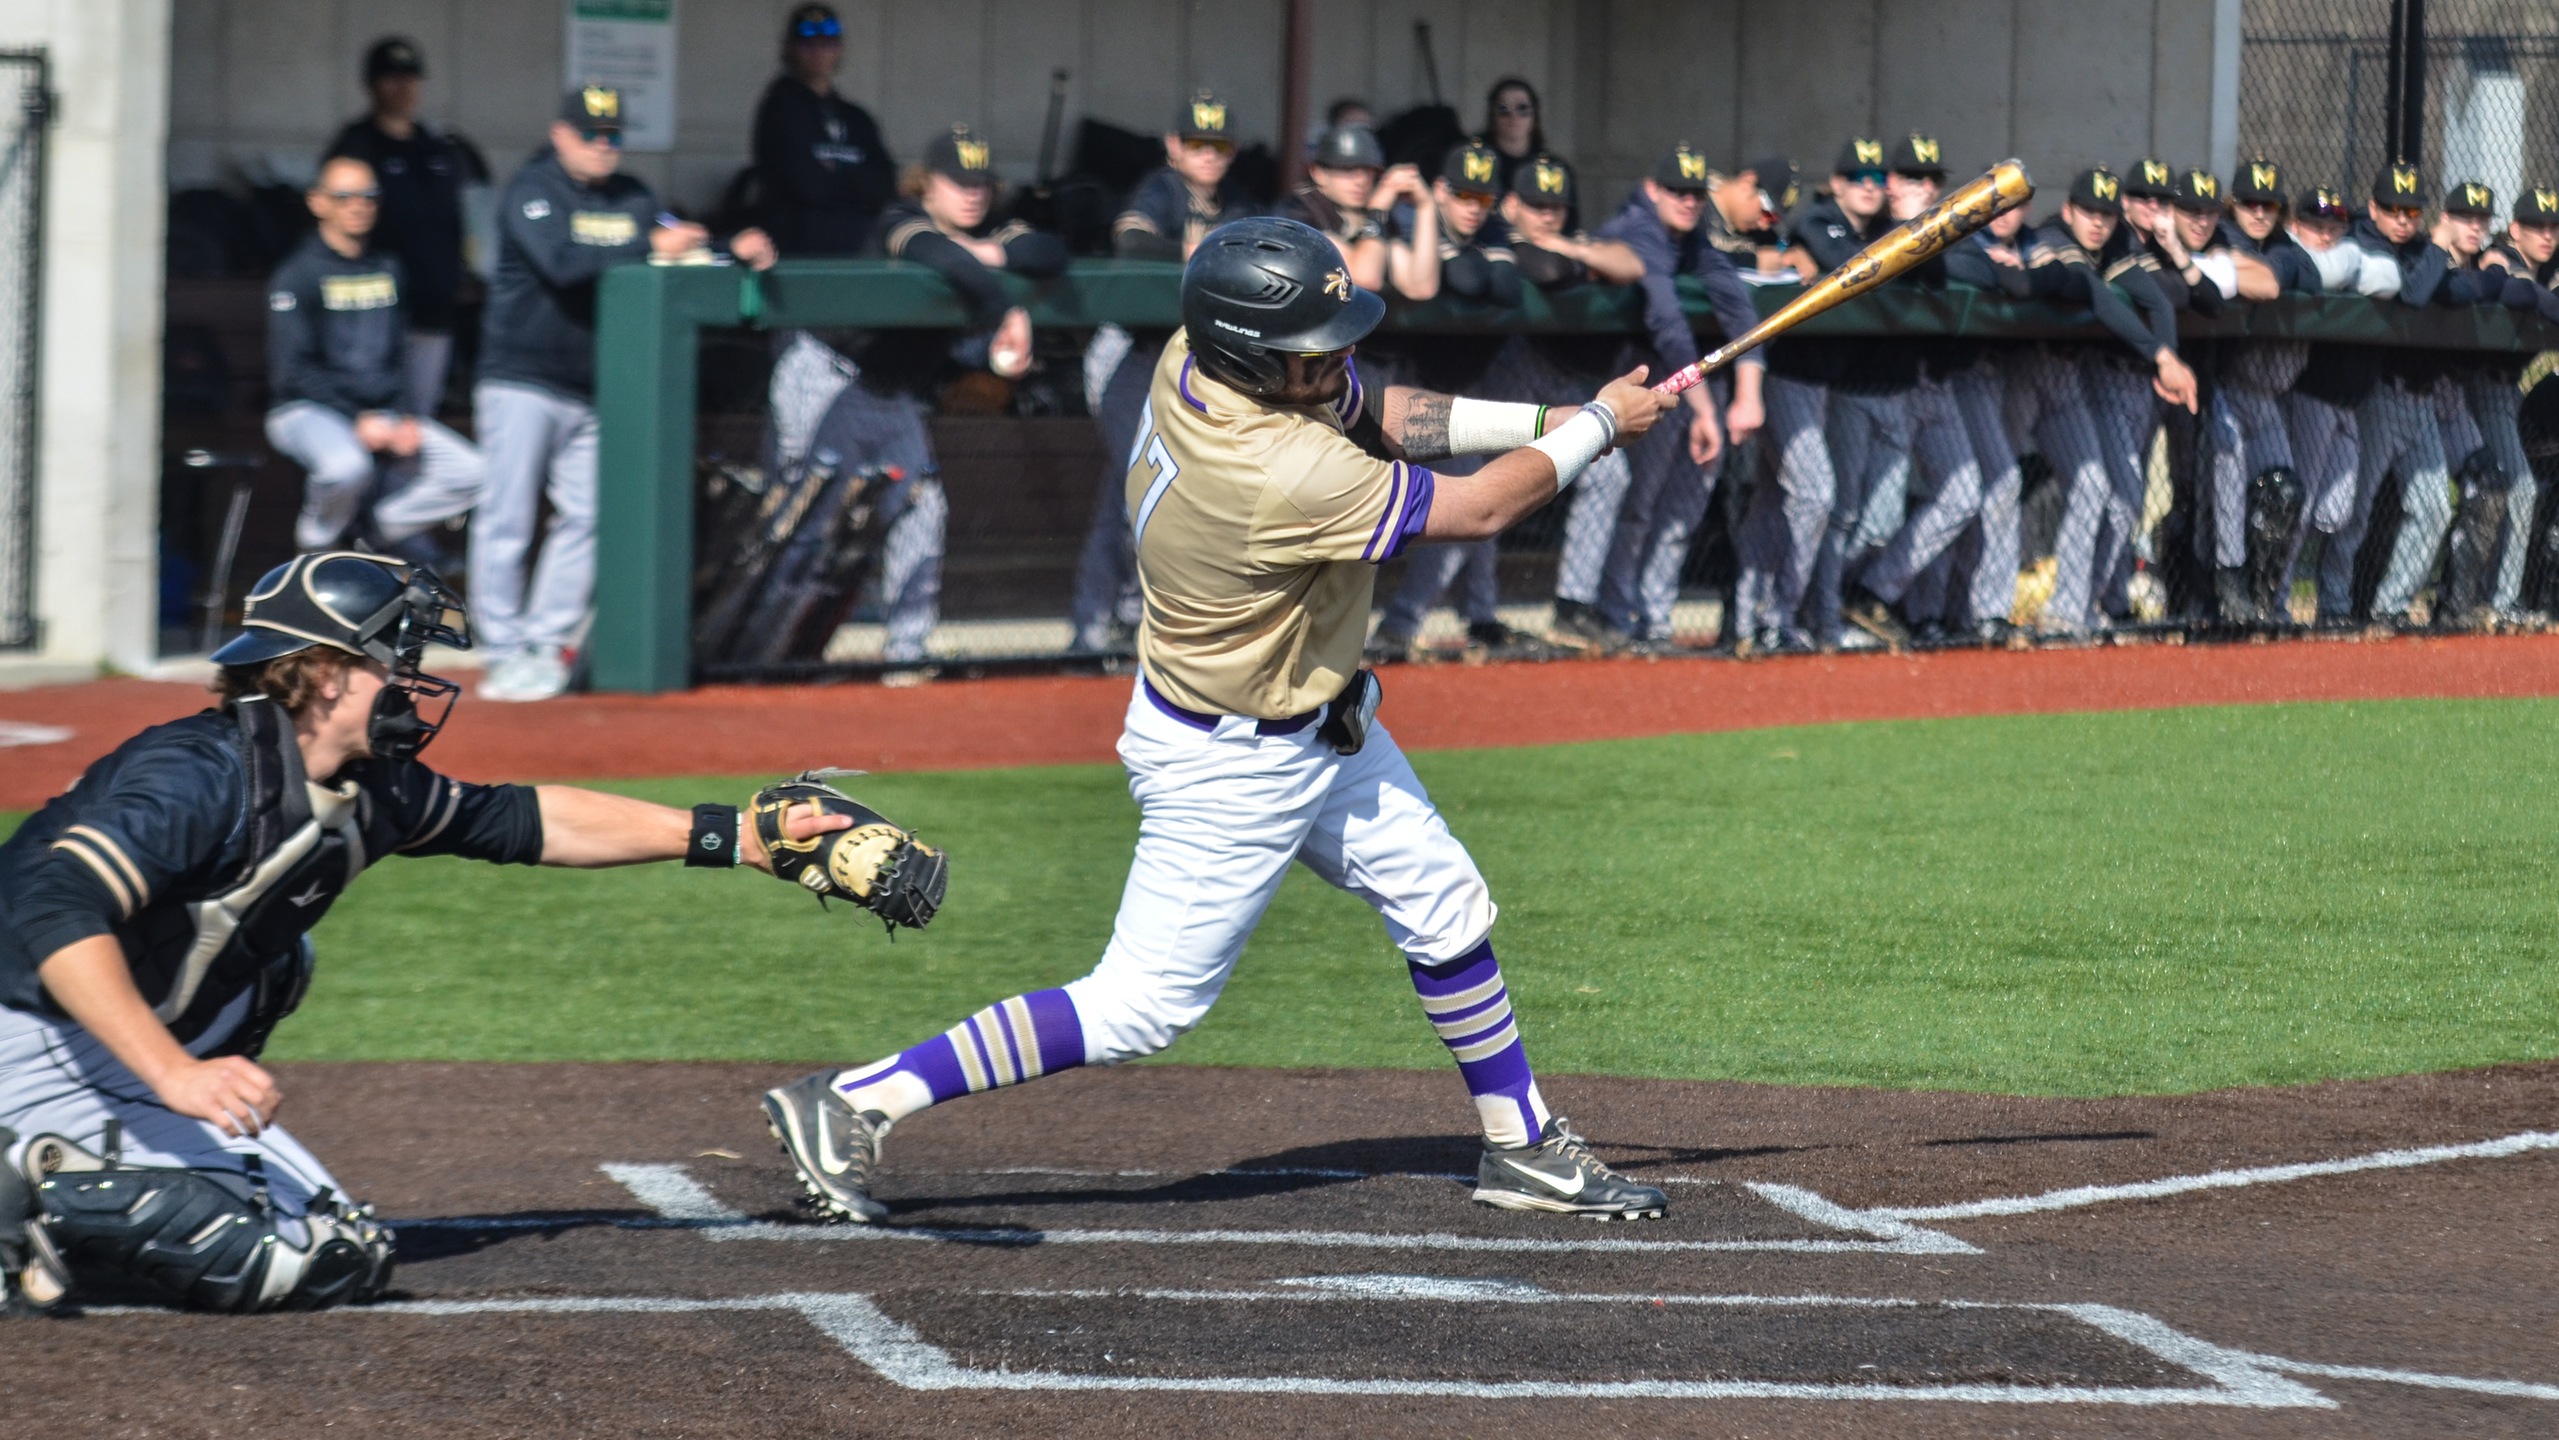 Baseball season closes out with a pair of losses to conference champs